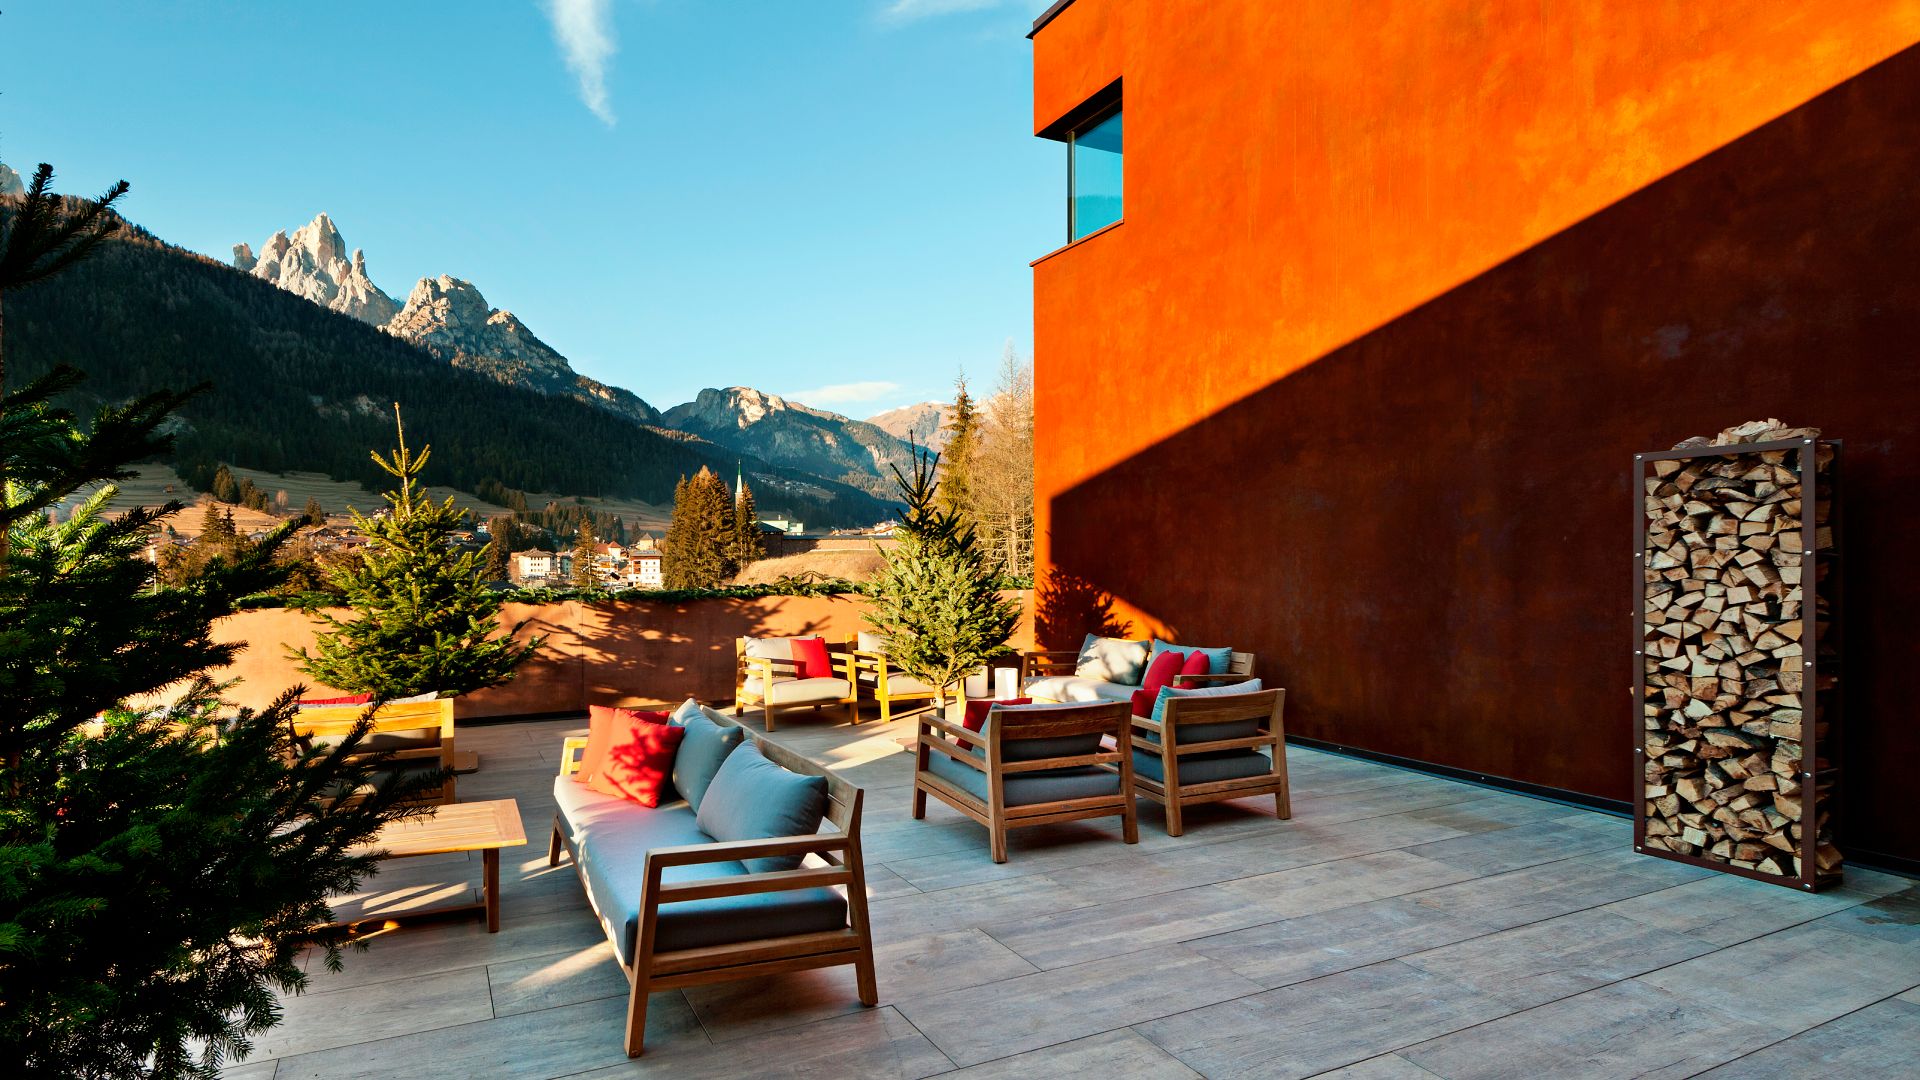 Oxydecor®, Corten effect vertical coating. Val di Fassa, Italy. Project: Mariela Goncalves